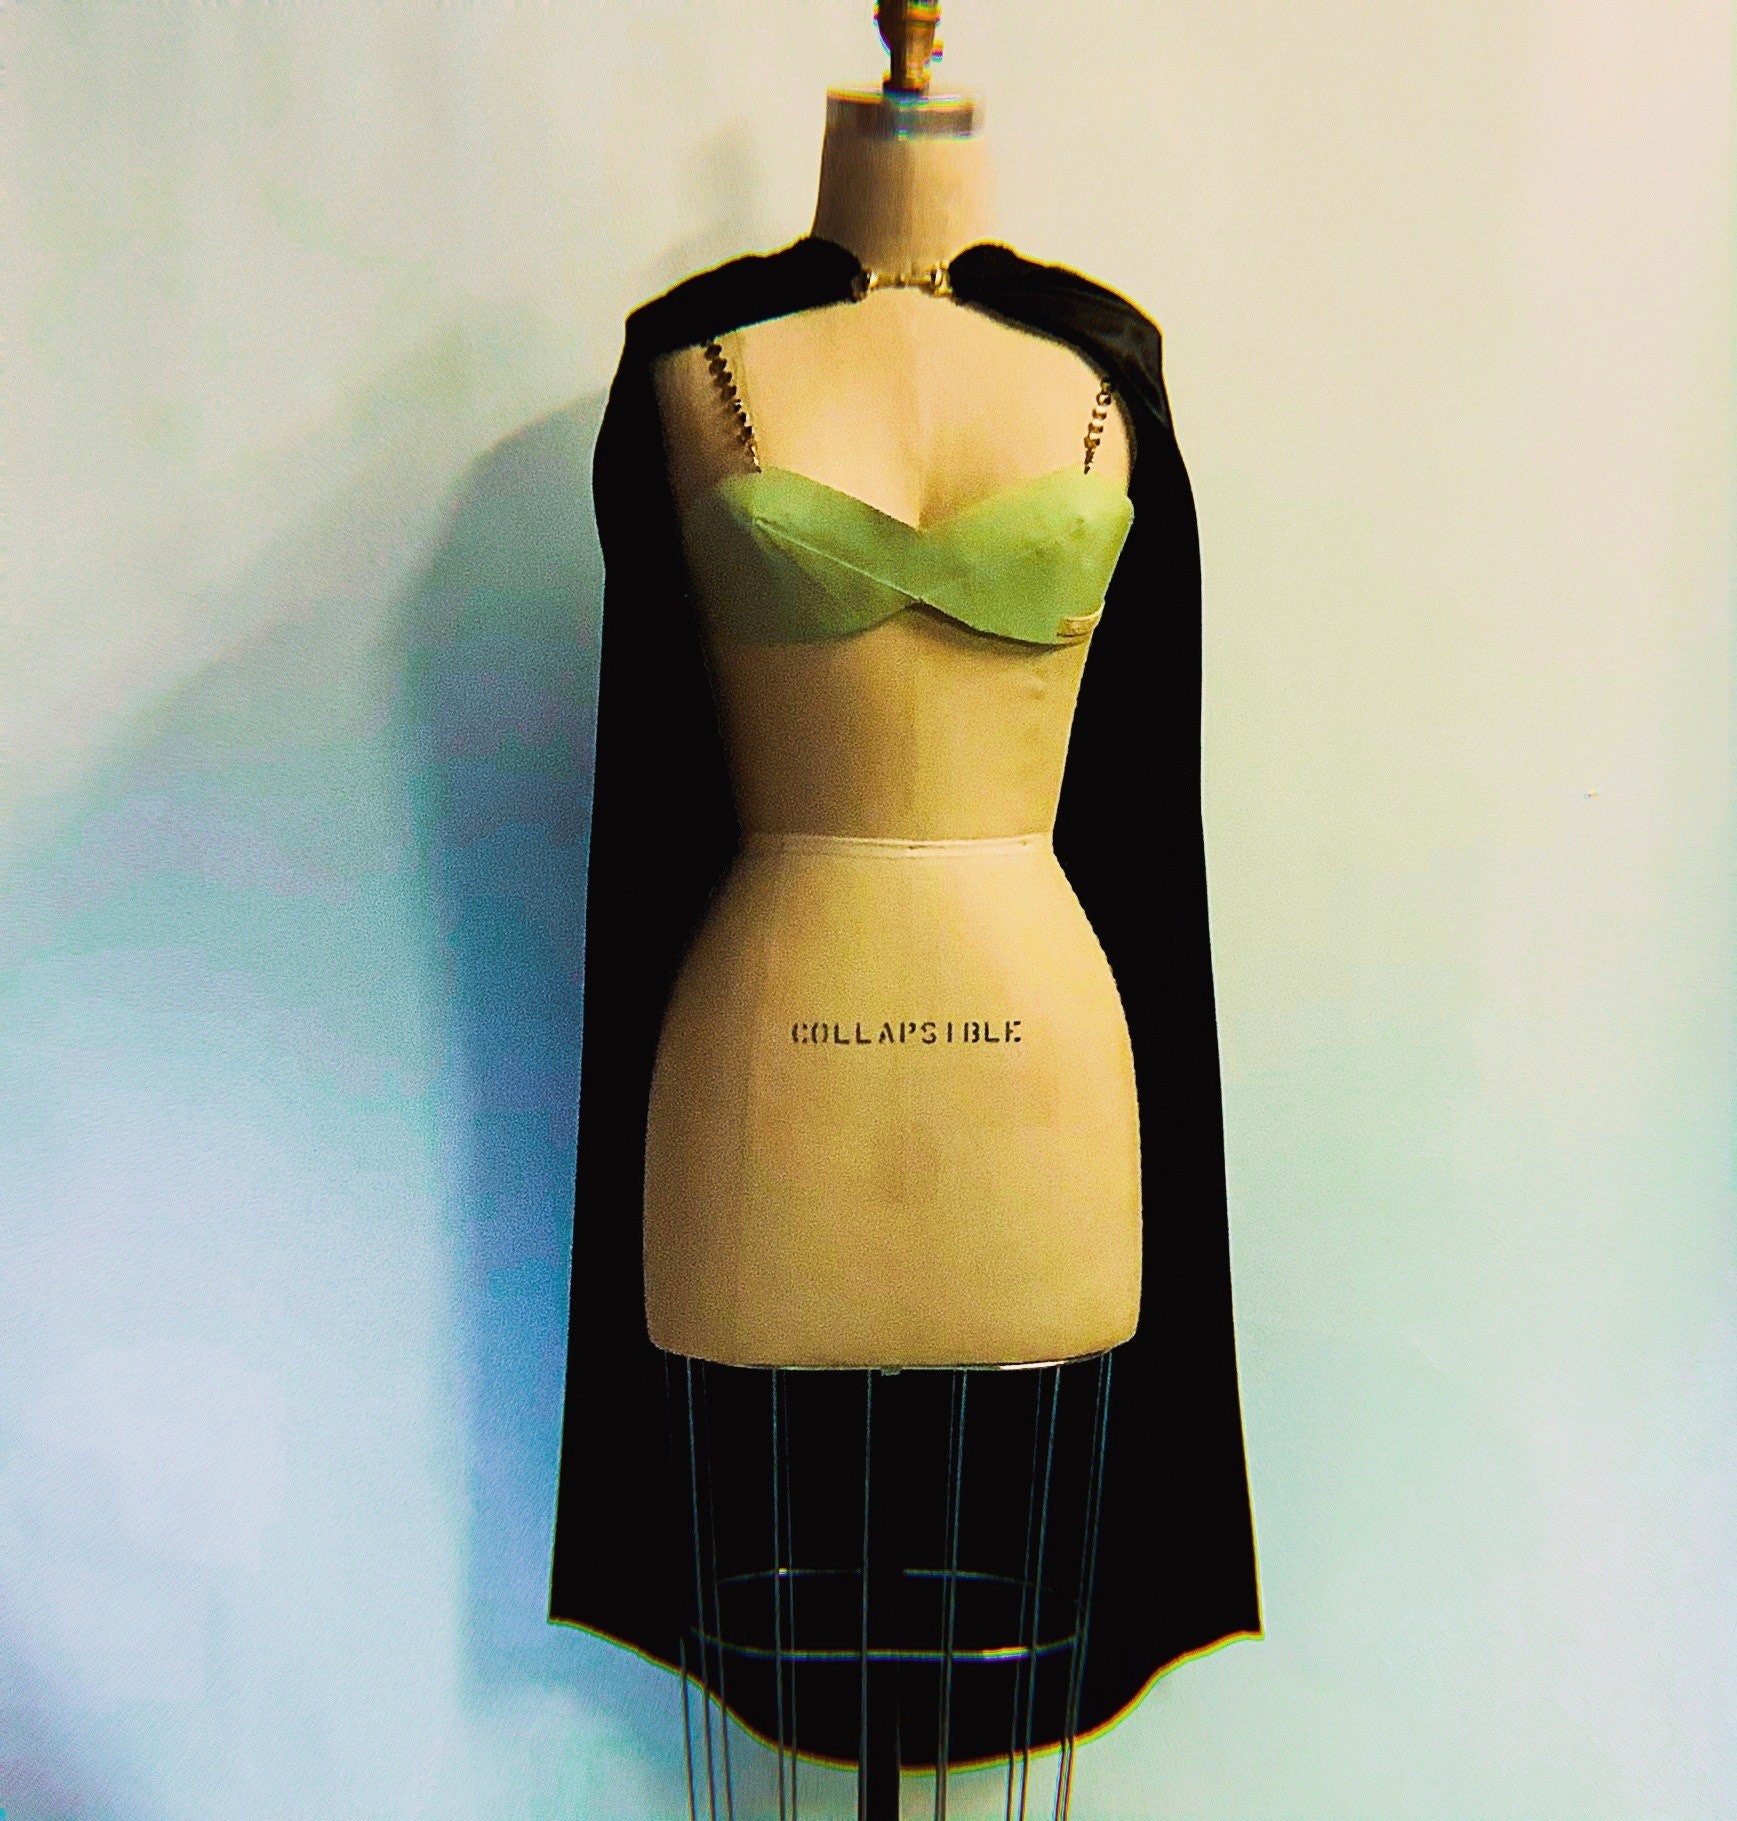 REVERSIBLE BRA TOP, A Bralette, Reverses From Gold Foil to Celadon Wool,  Transforming, Adjustable -  Canada